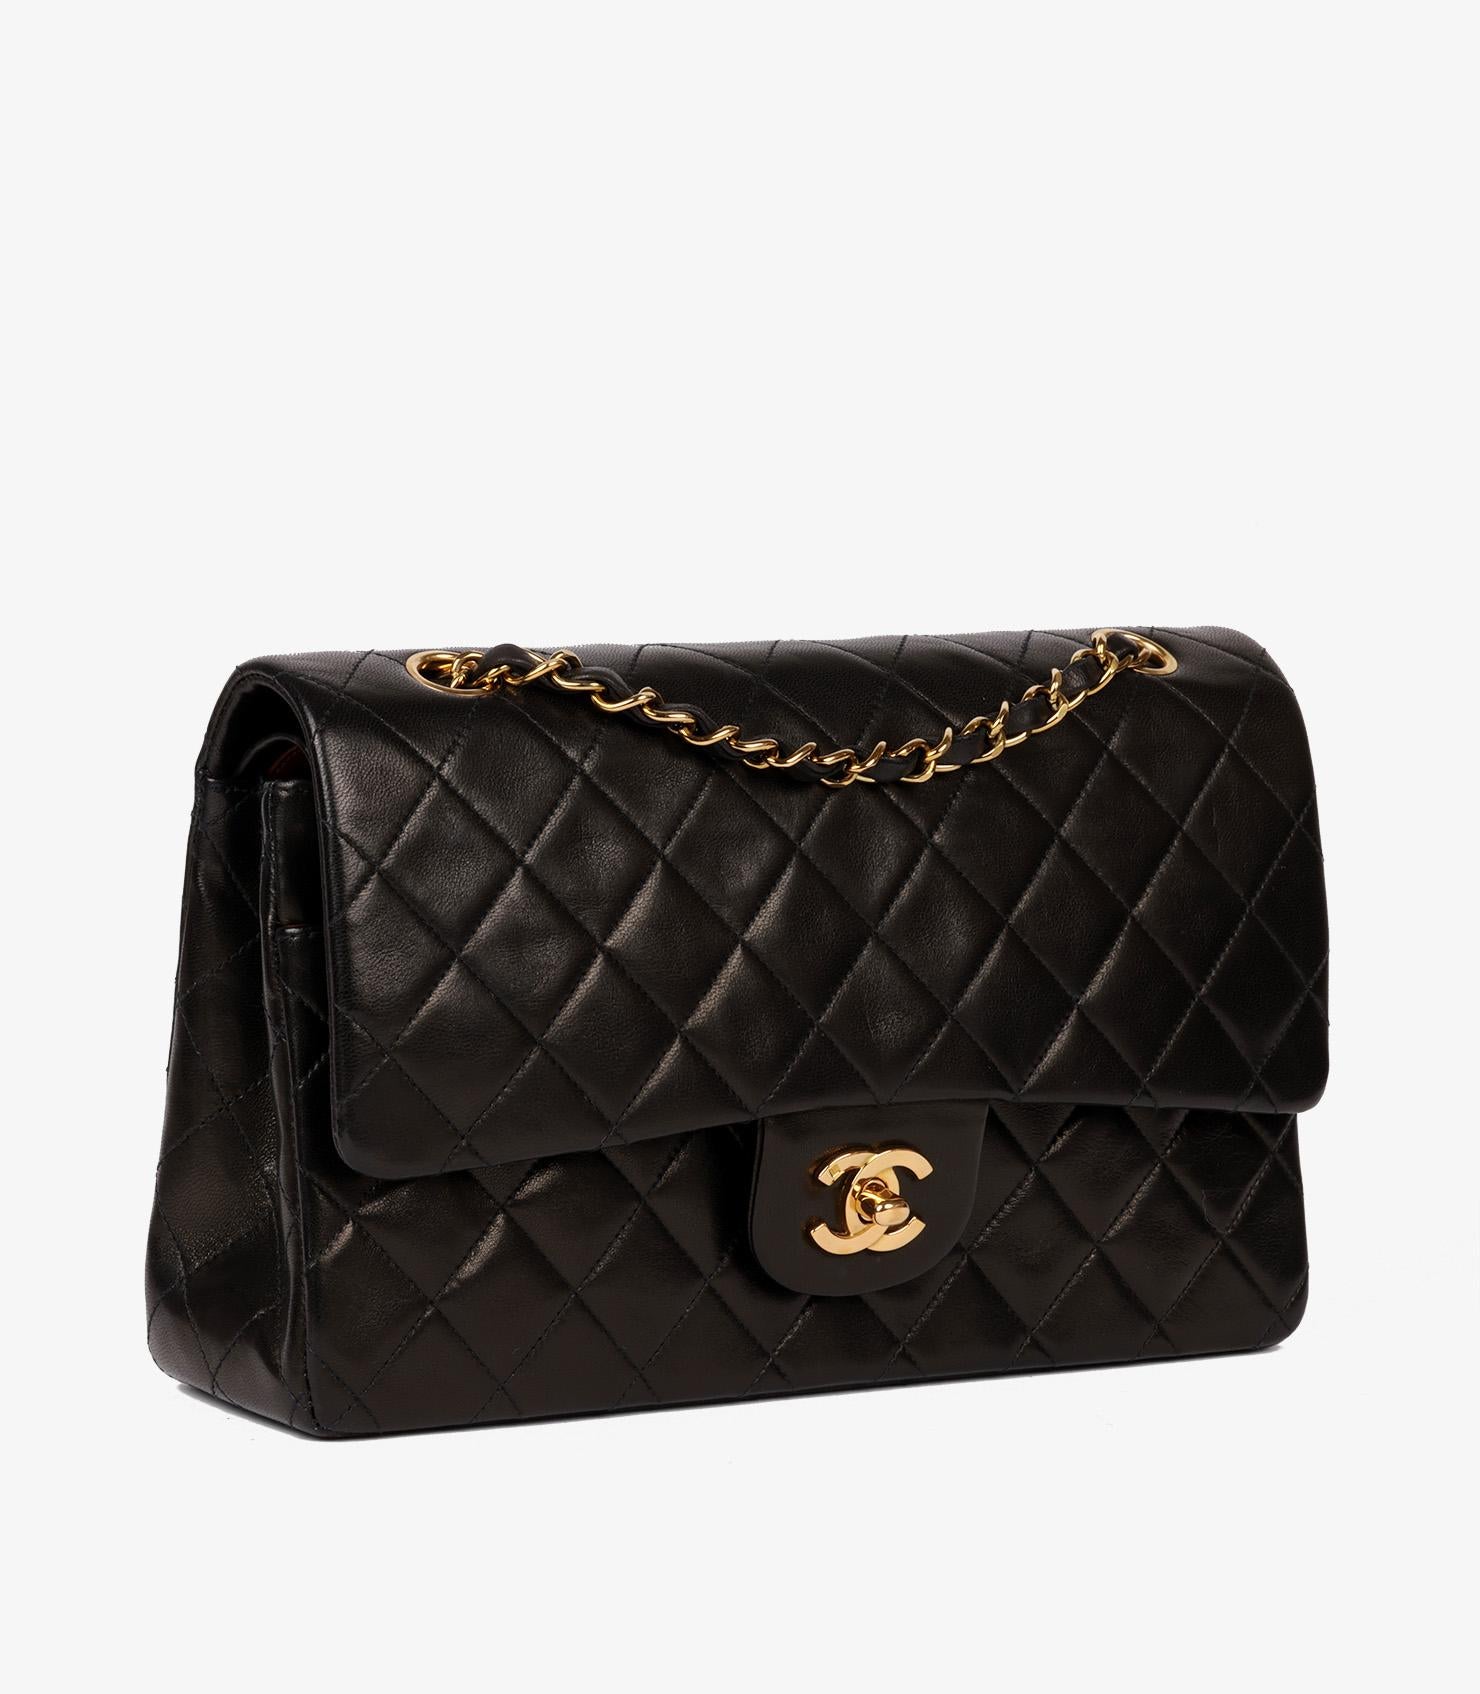 Chanel Black Quilted Lambskin Vintage Medium Classic Double Flap Bag

Brand- Chanel
Model- Medium Classic Double Flap Bag
Product Type- Shoulder
Serial Number- 28*****
Age- Circa 1992
Accompanied By- Chanel Dust Bag, Authenticity Card
Colour-